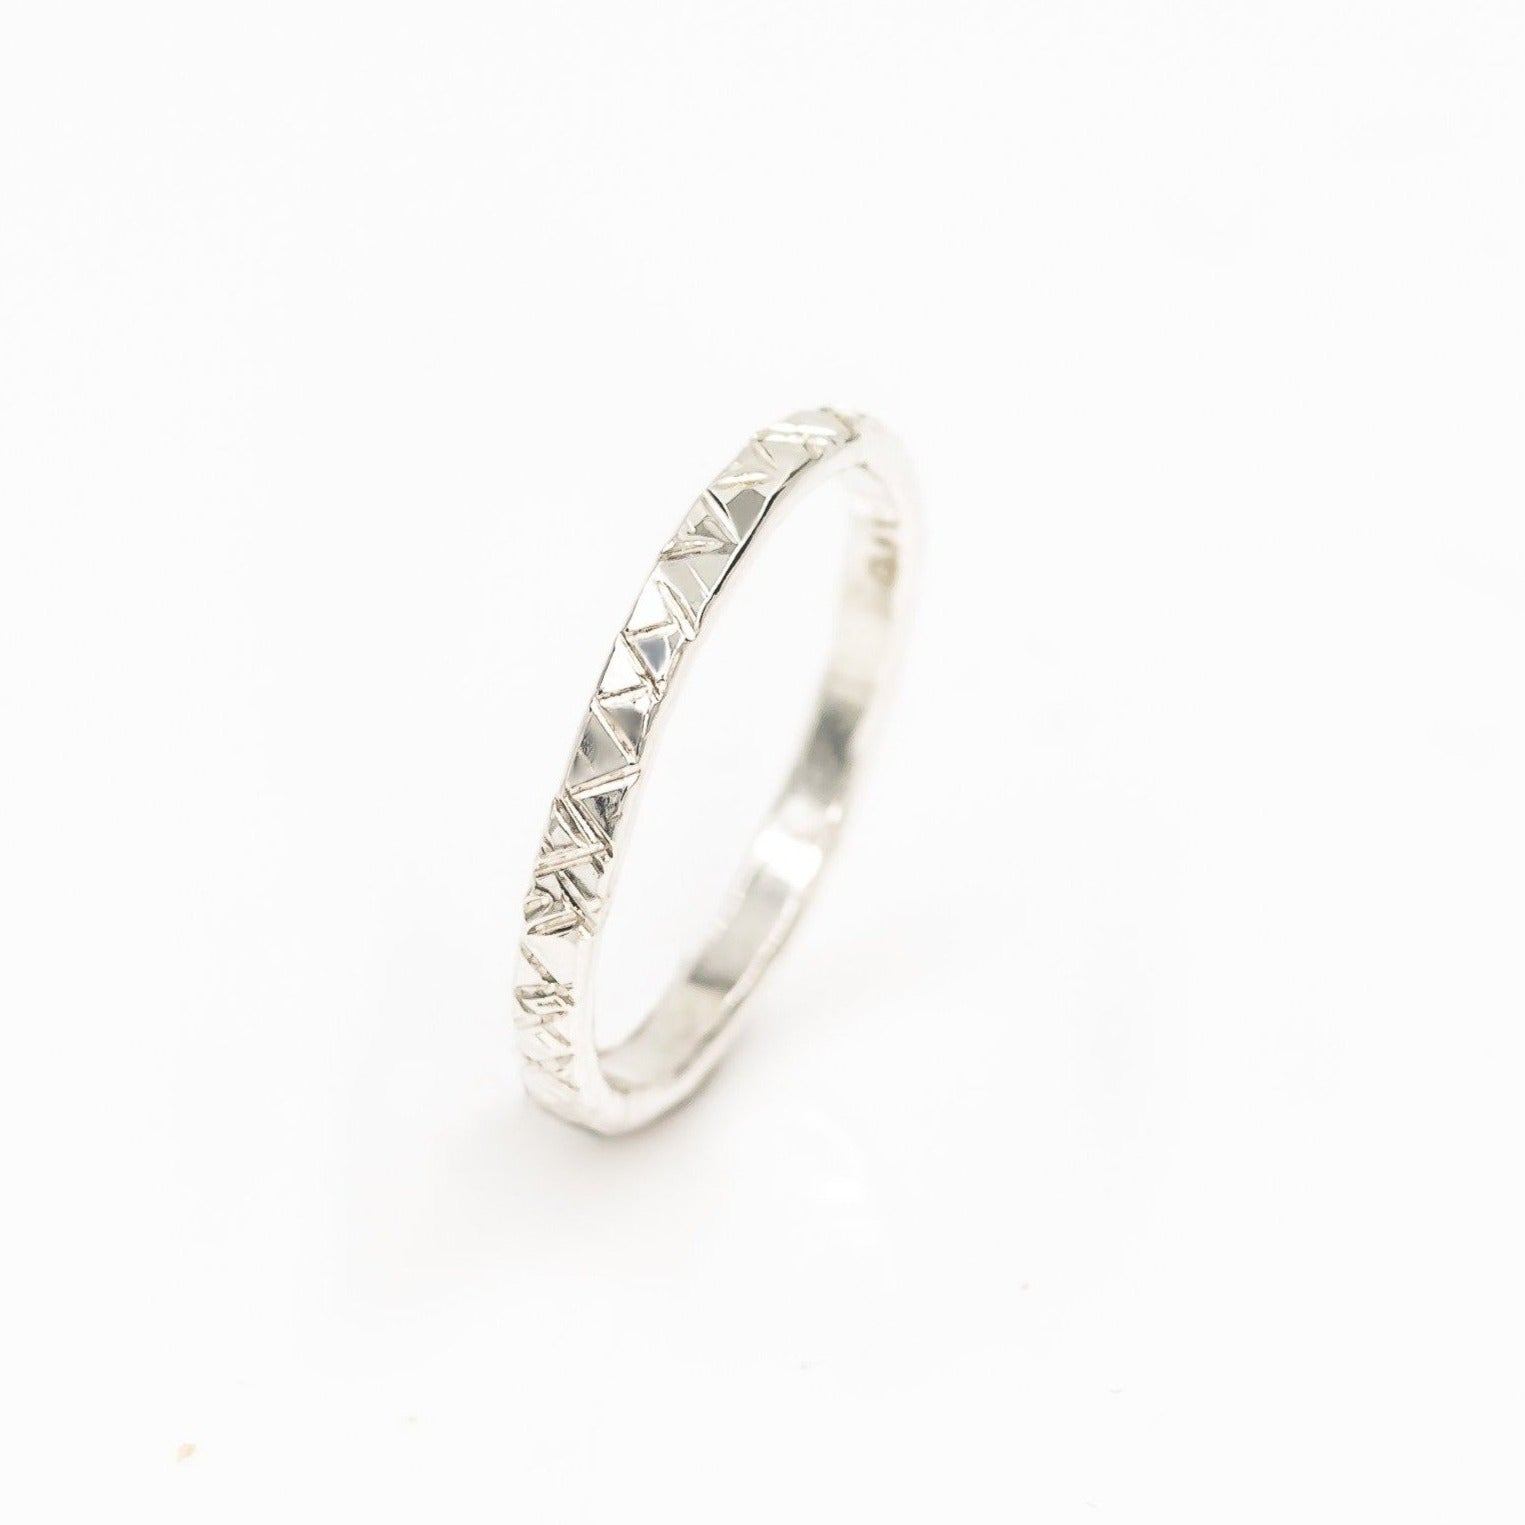 sterling silver criss cross textured ring band